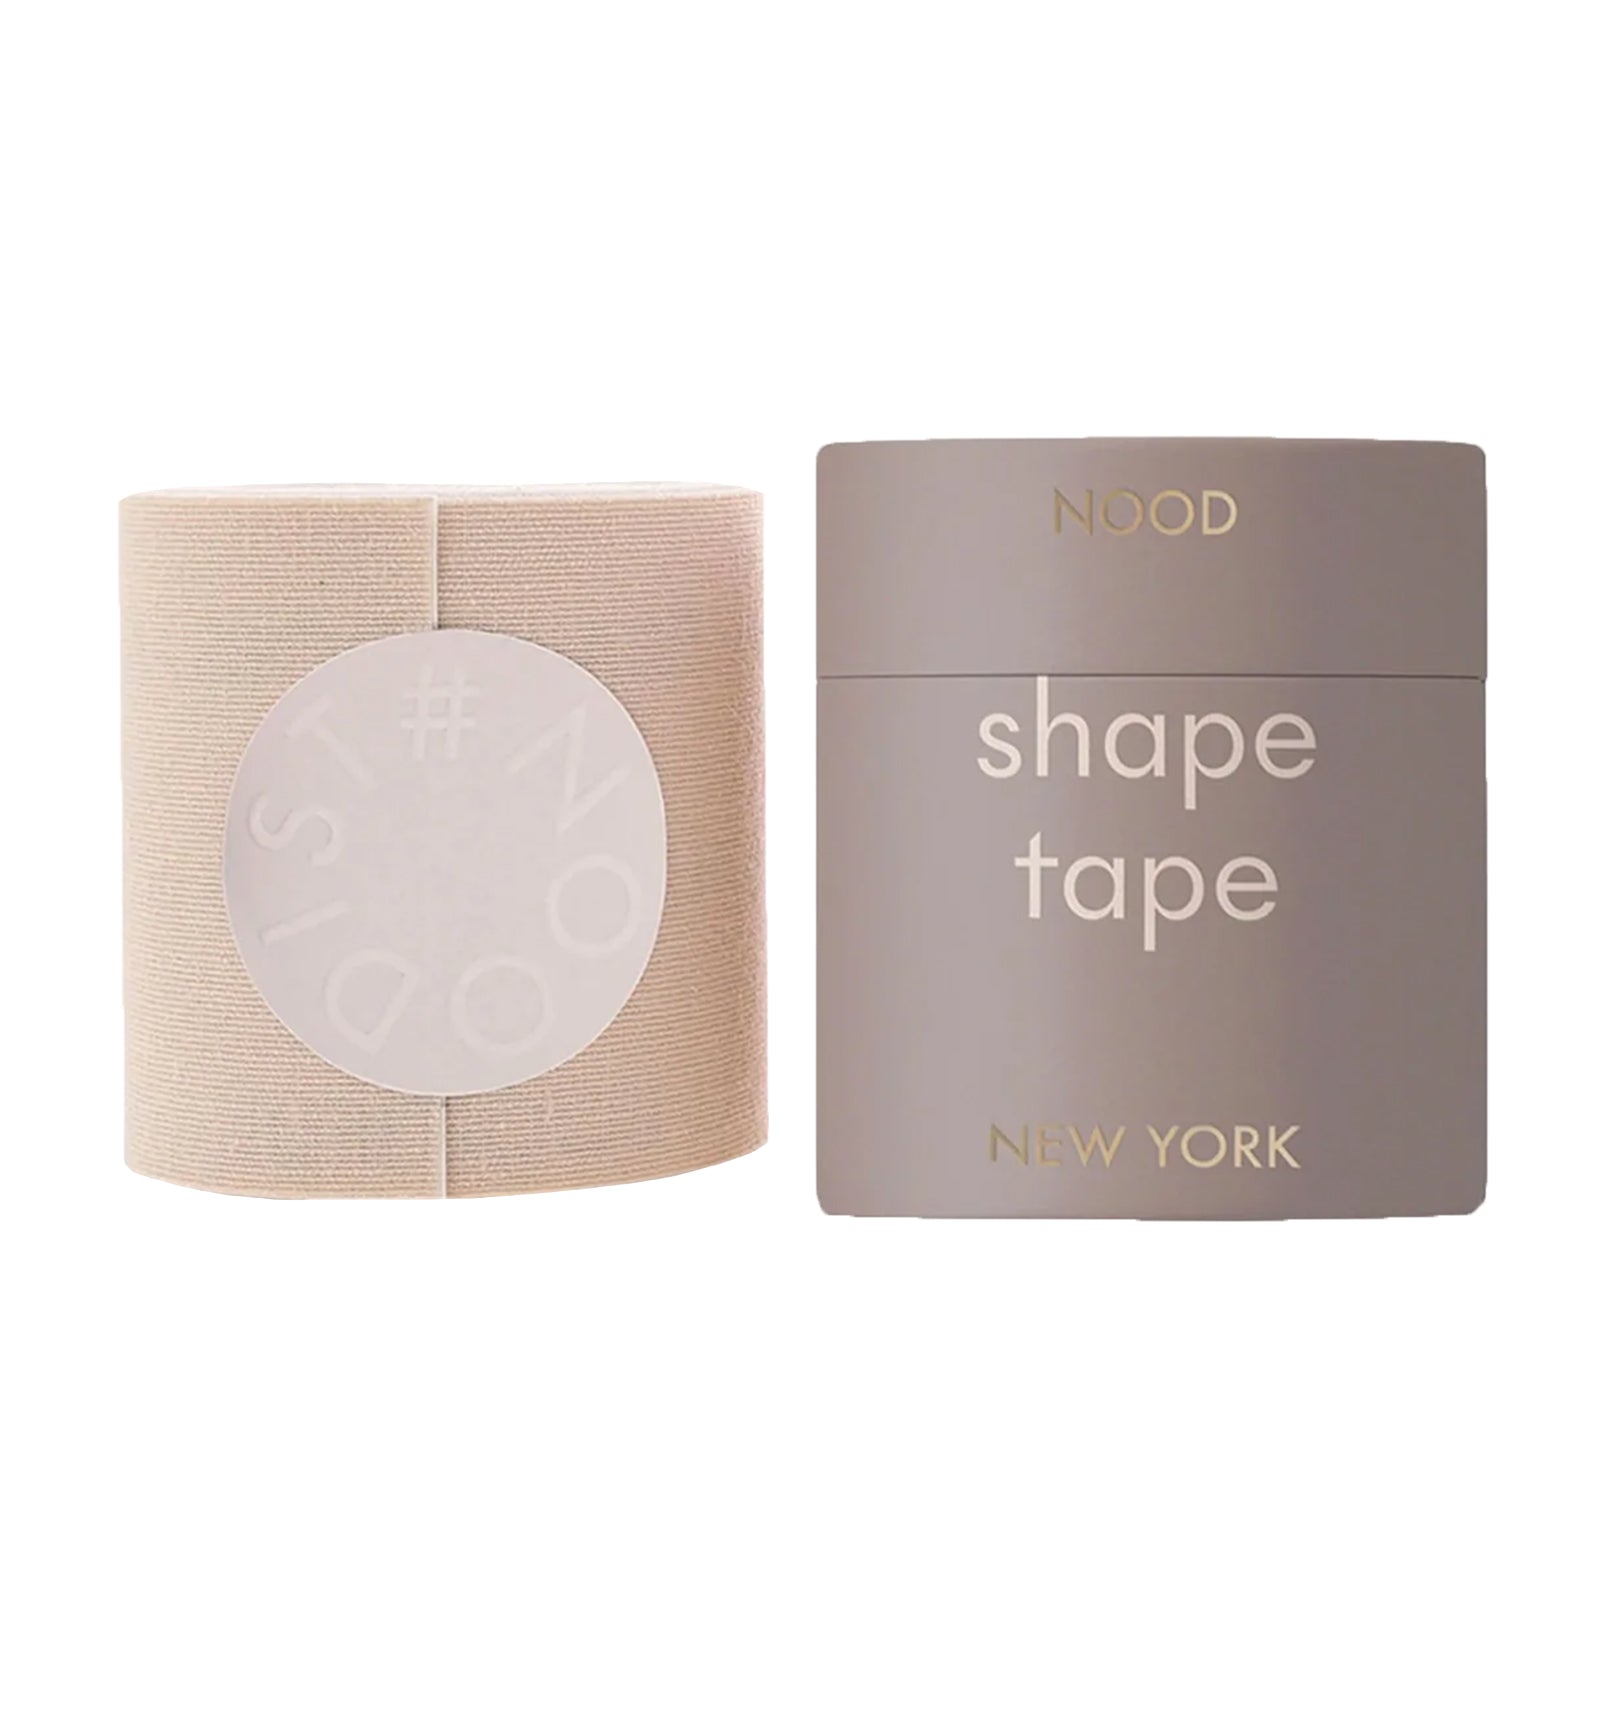 NOOD Shape Tape Breast Tape (3 inch wide, 16 ft Roll)- Nood Shade 7